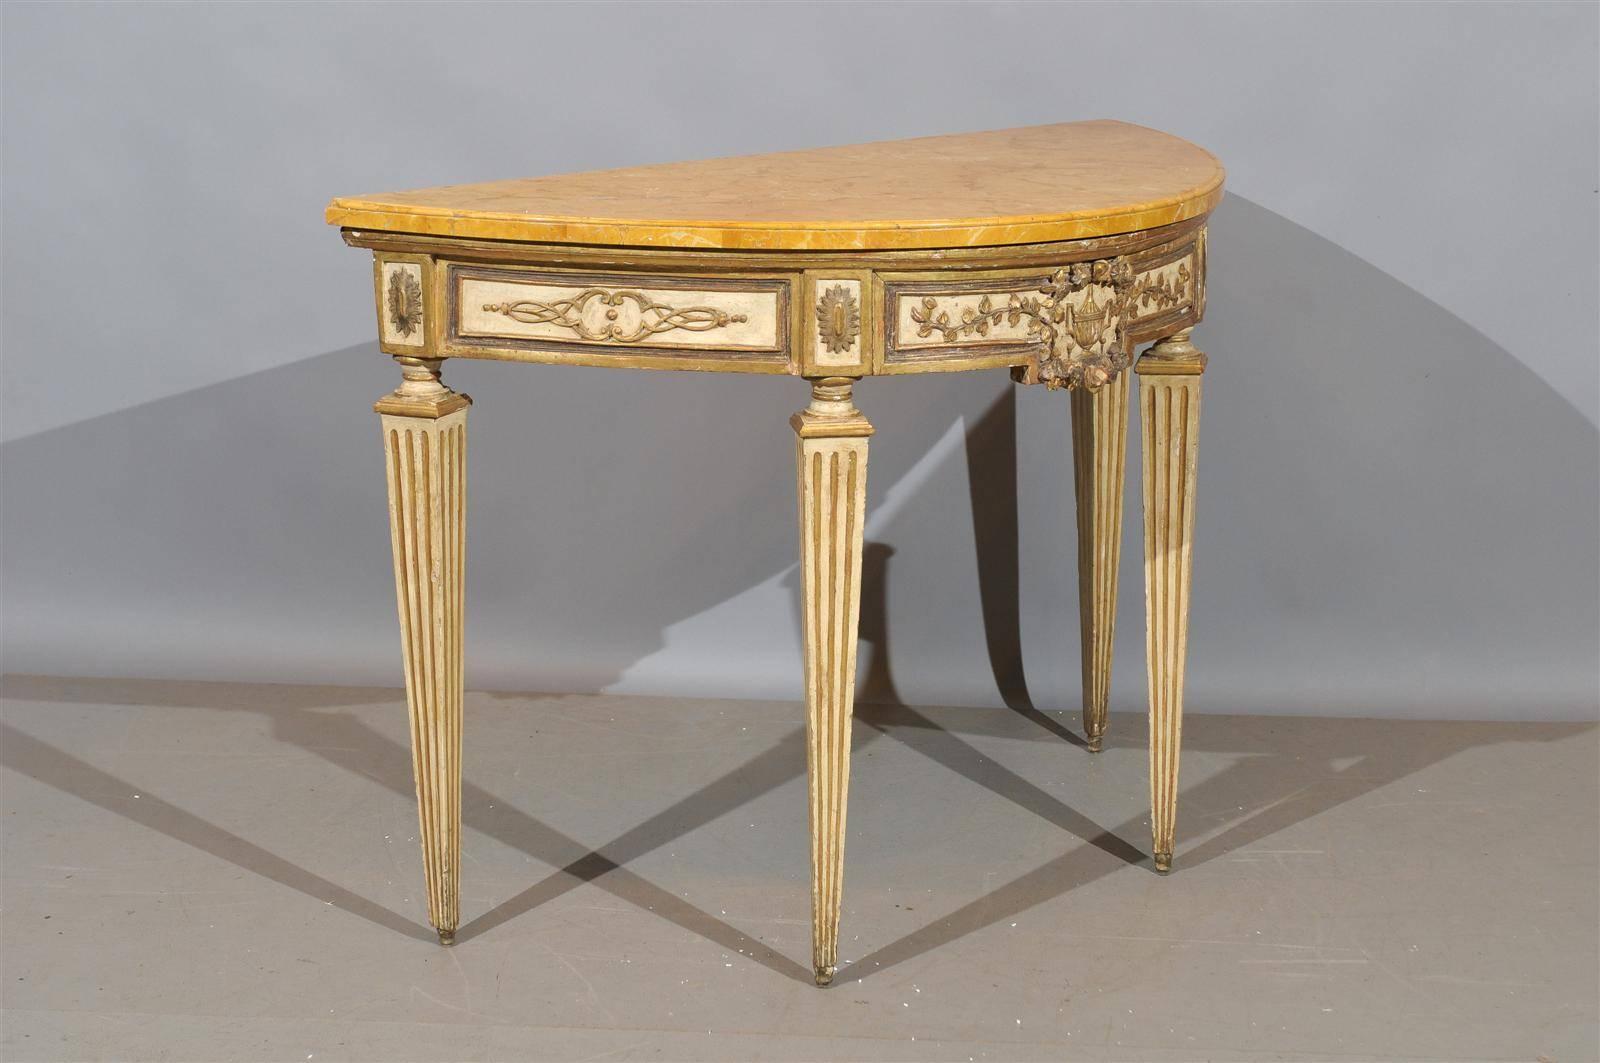 A pair of painted & parcel gilt Neoclassical consoles with sienna marble tops. 

To view all our inventory, please visit our personal website. 

William Word Fine Antiques: Atlanta's source for antique interiors since 1956. 

